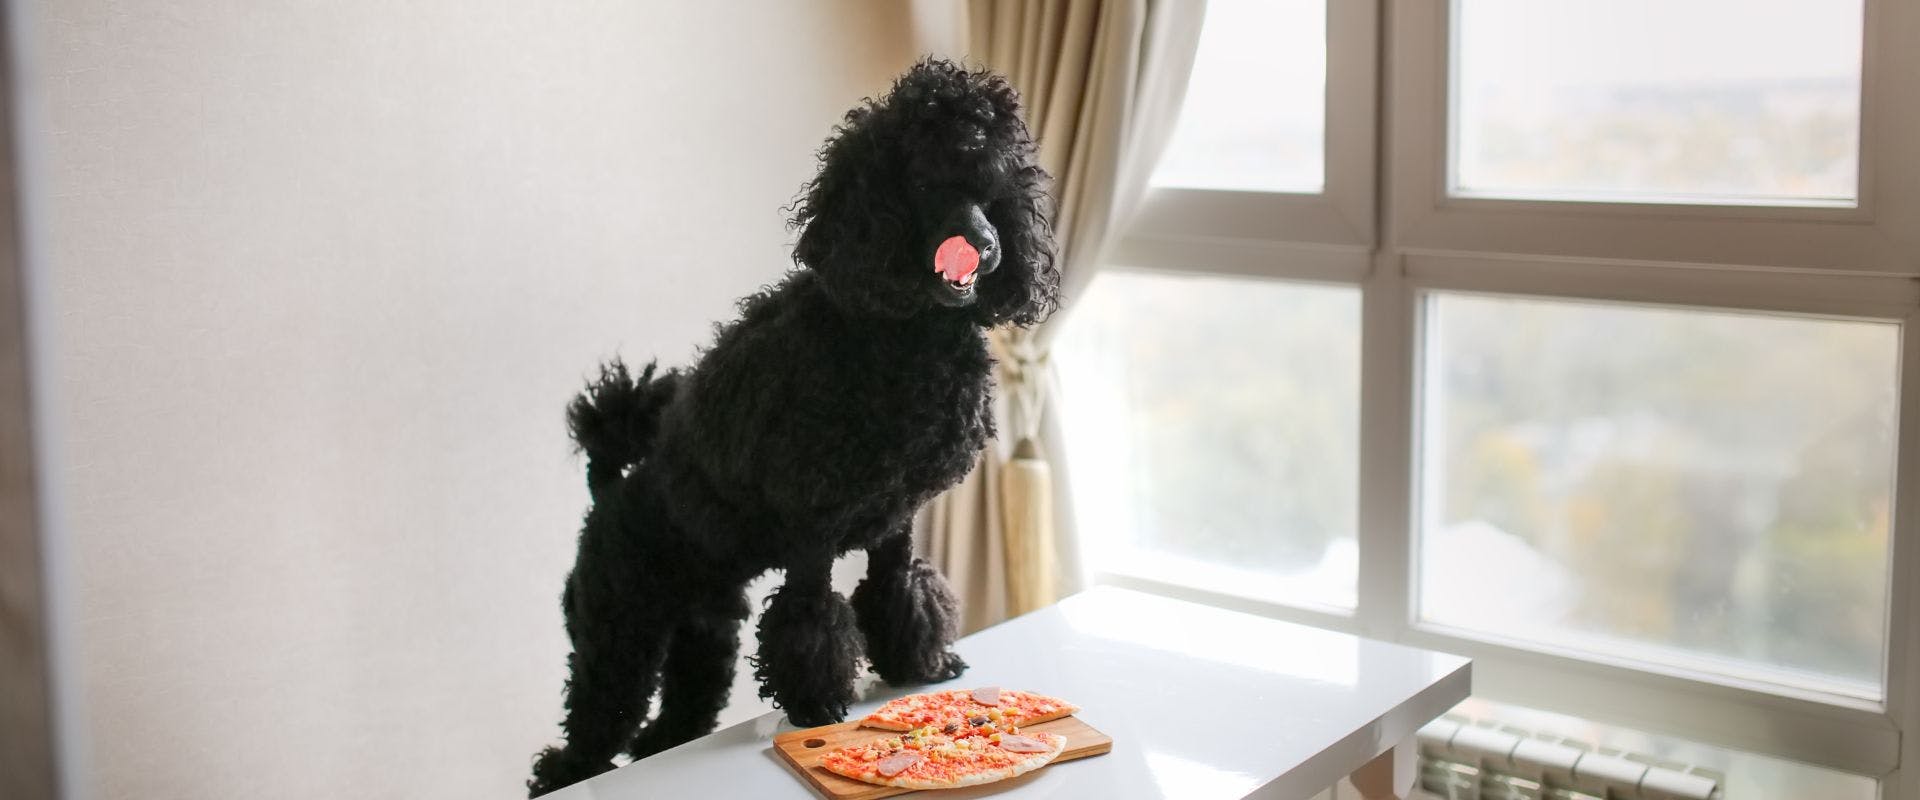 Black poodle dog with tomato pizza